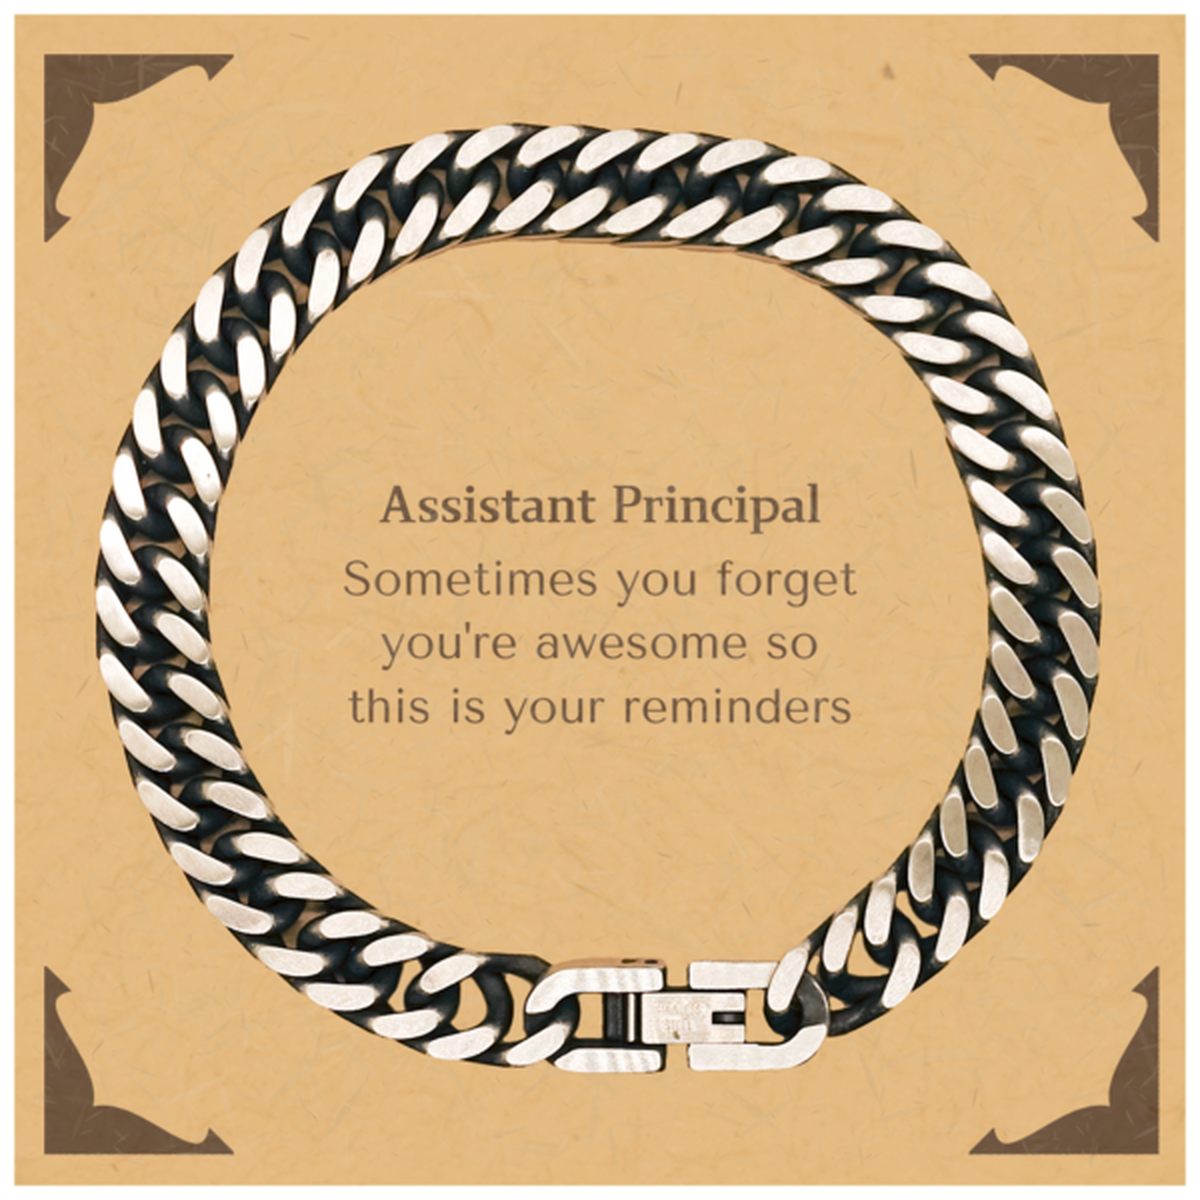 Sentimental Assistant Principal Cuban Link Chain Bracelet, Assistant Principal Sometimes you forget you're awesome so this is your reminders, Graduation Christmas Birthday Gifts for Assistant Principal, Men, Women, Coworkers